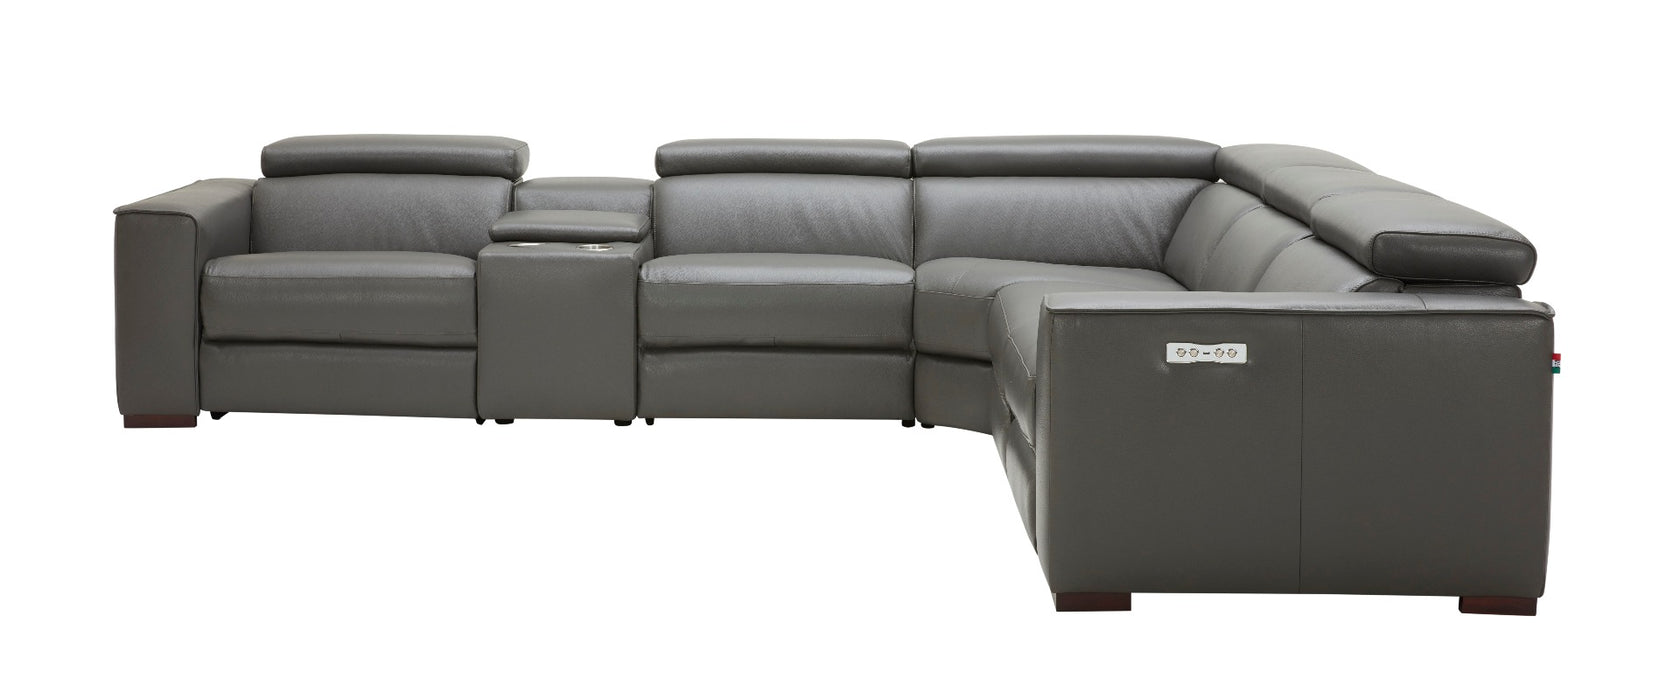 J&M Furniture - Picasso Motion Sectional in Dark Grey - 18865-DG